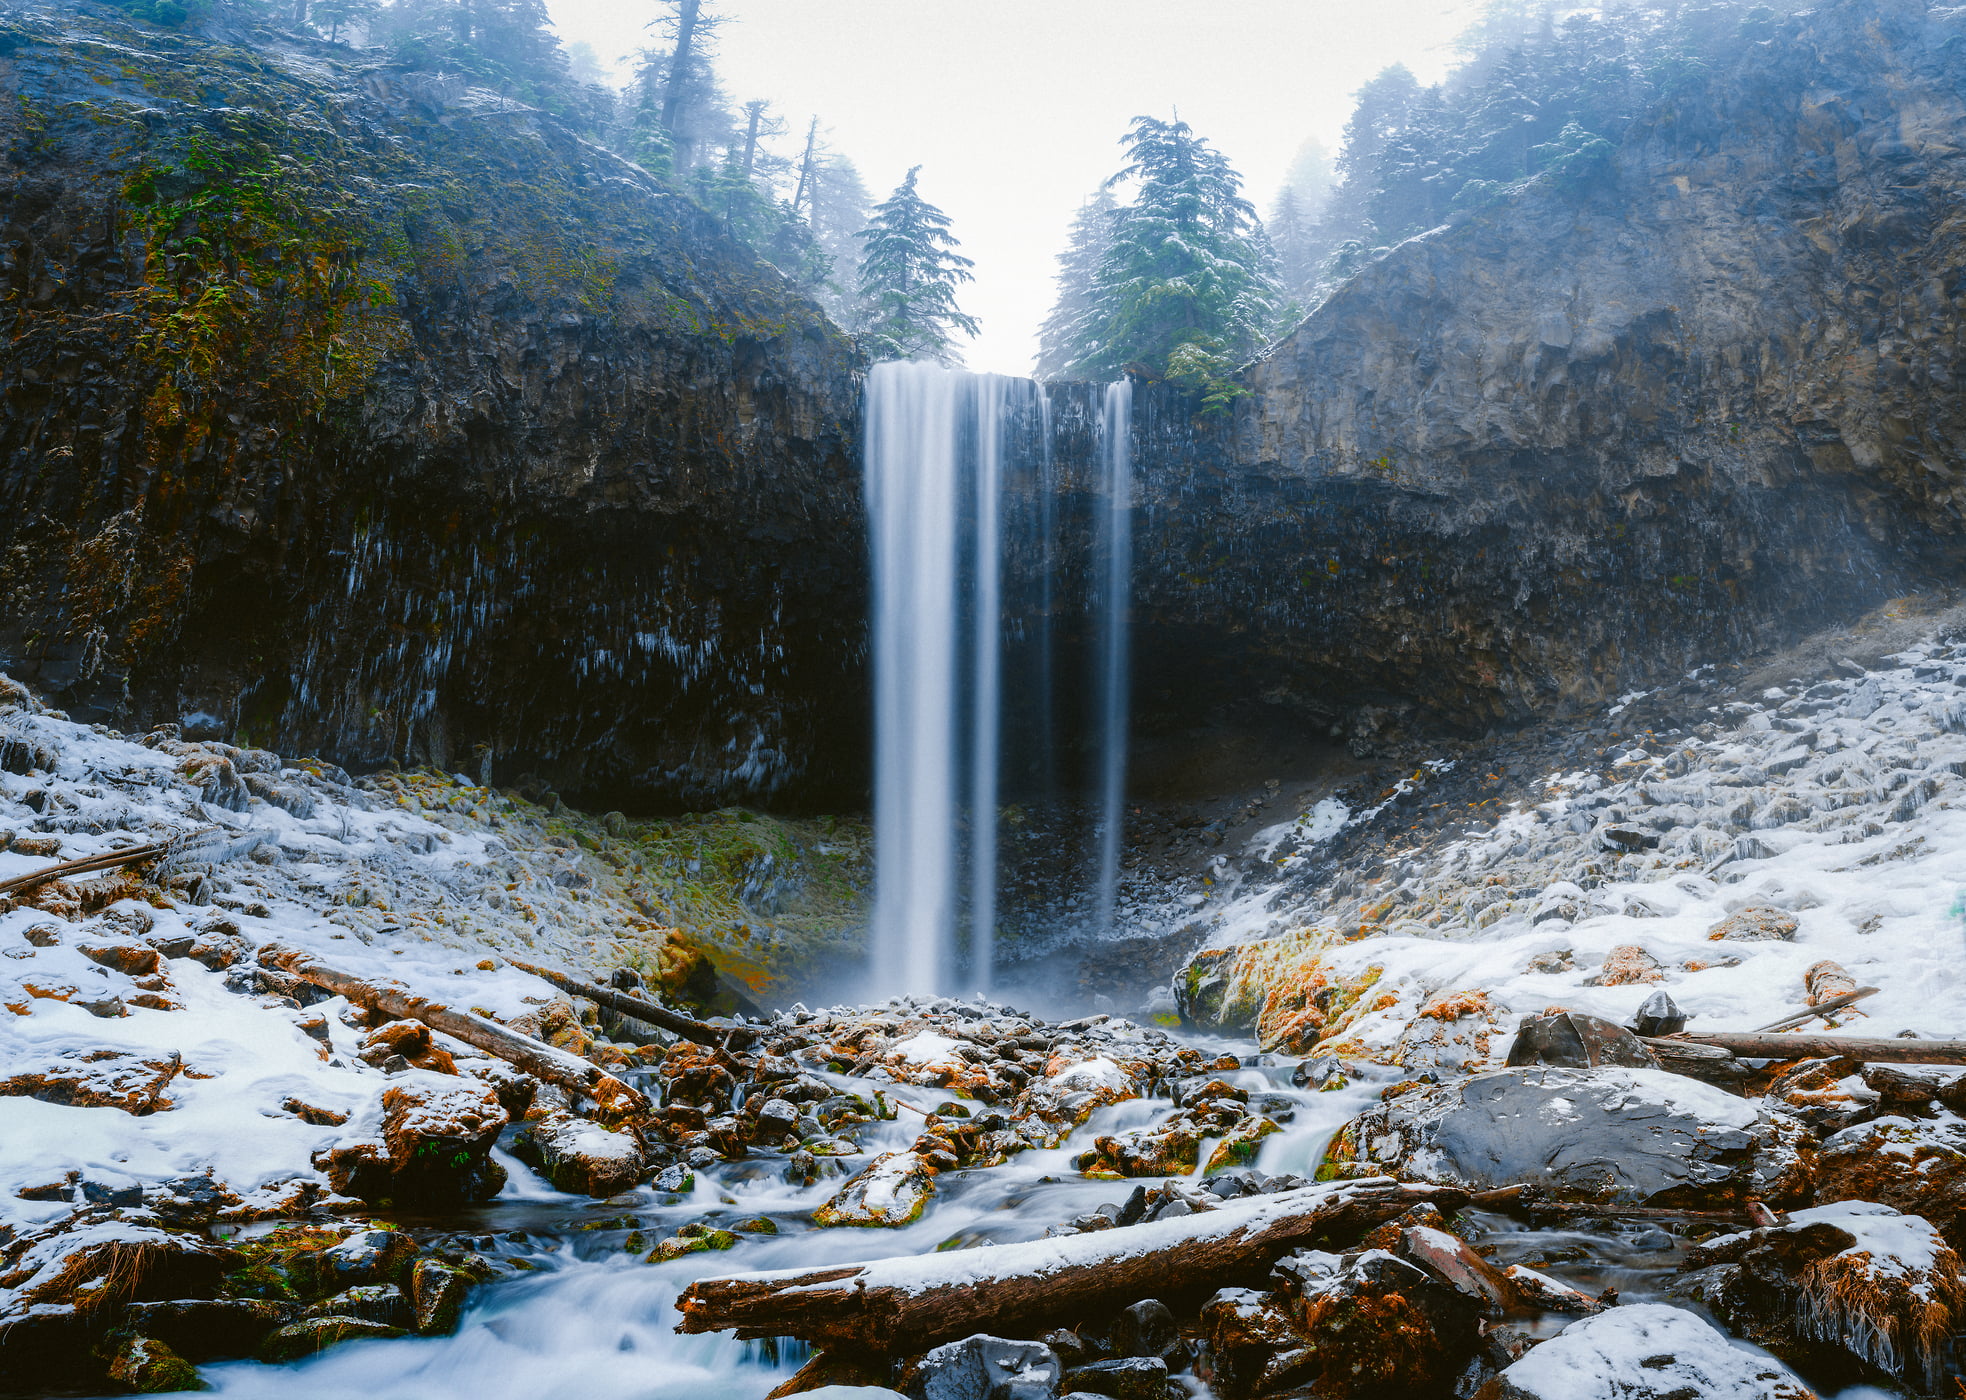 510 megapixels! A very high resolution, large-format VAST photo print of a snowy waterfall; photograph created by Justin Katz at Tamawanas Falls, Mount Hood, Oregon